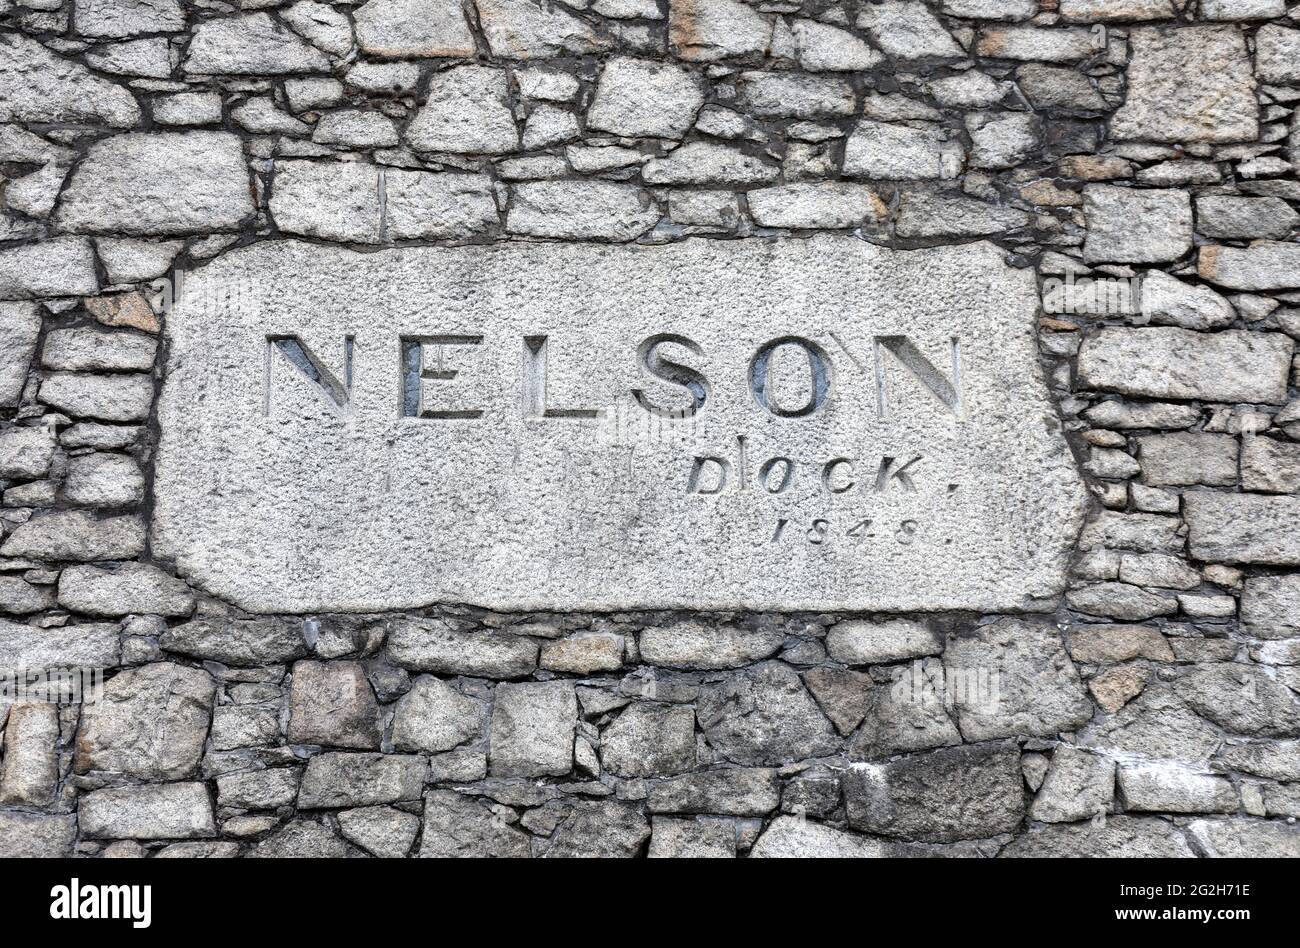 Nelson Dock sign in the boundary wall at Liverpool Stock Photo